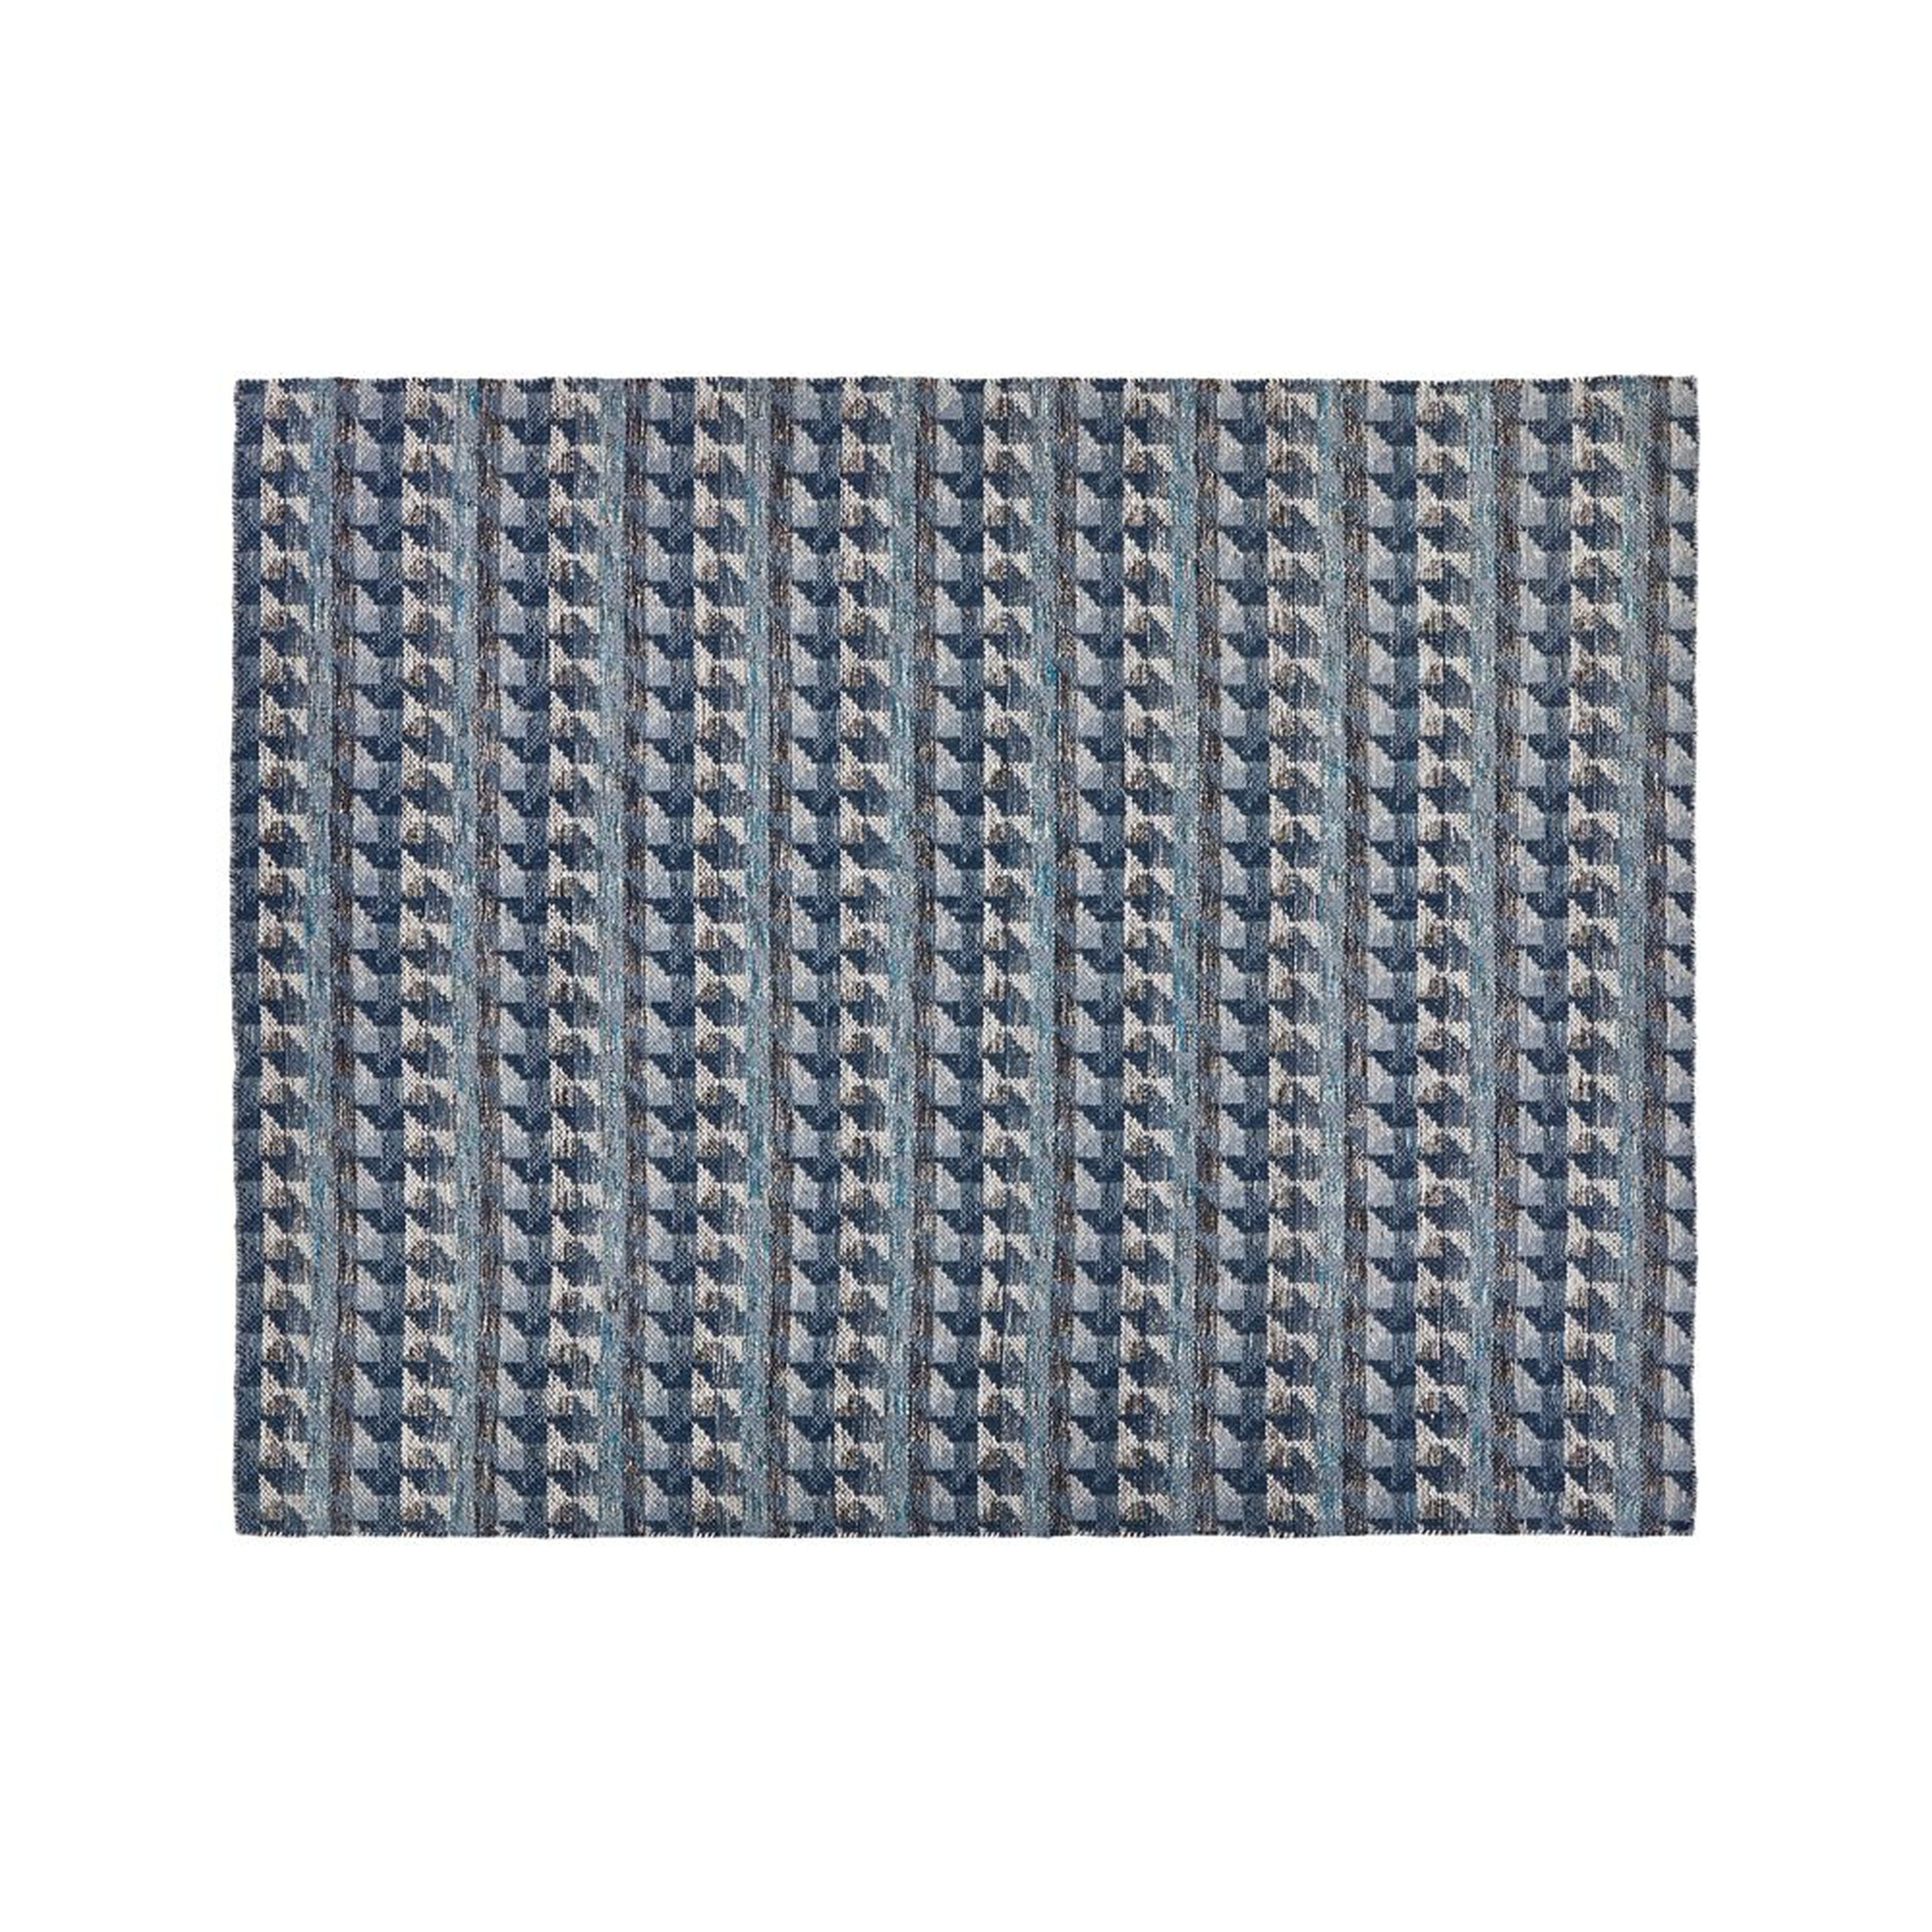 Onette Blue Dhurrie Rug 8'x10' - Crate and Barrel